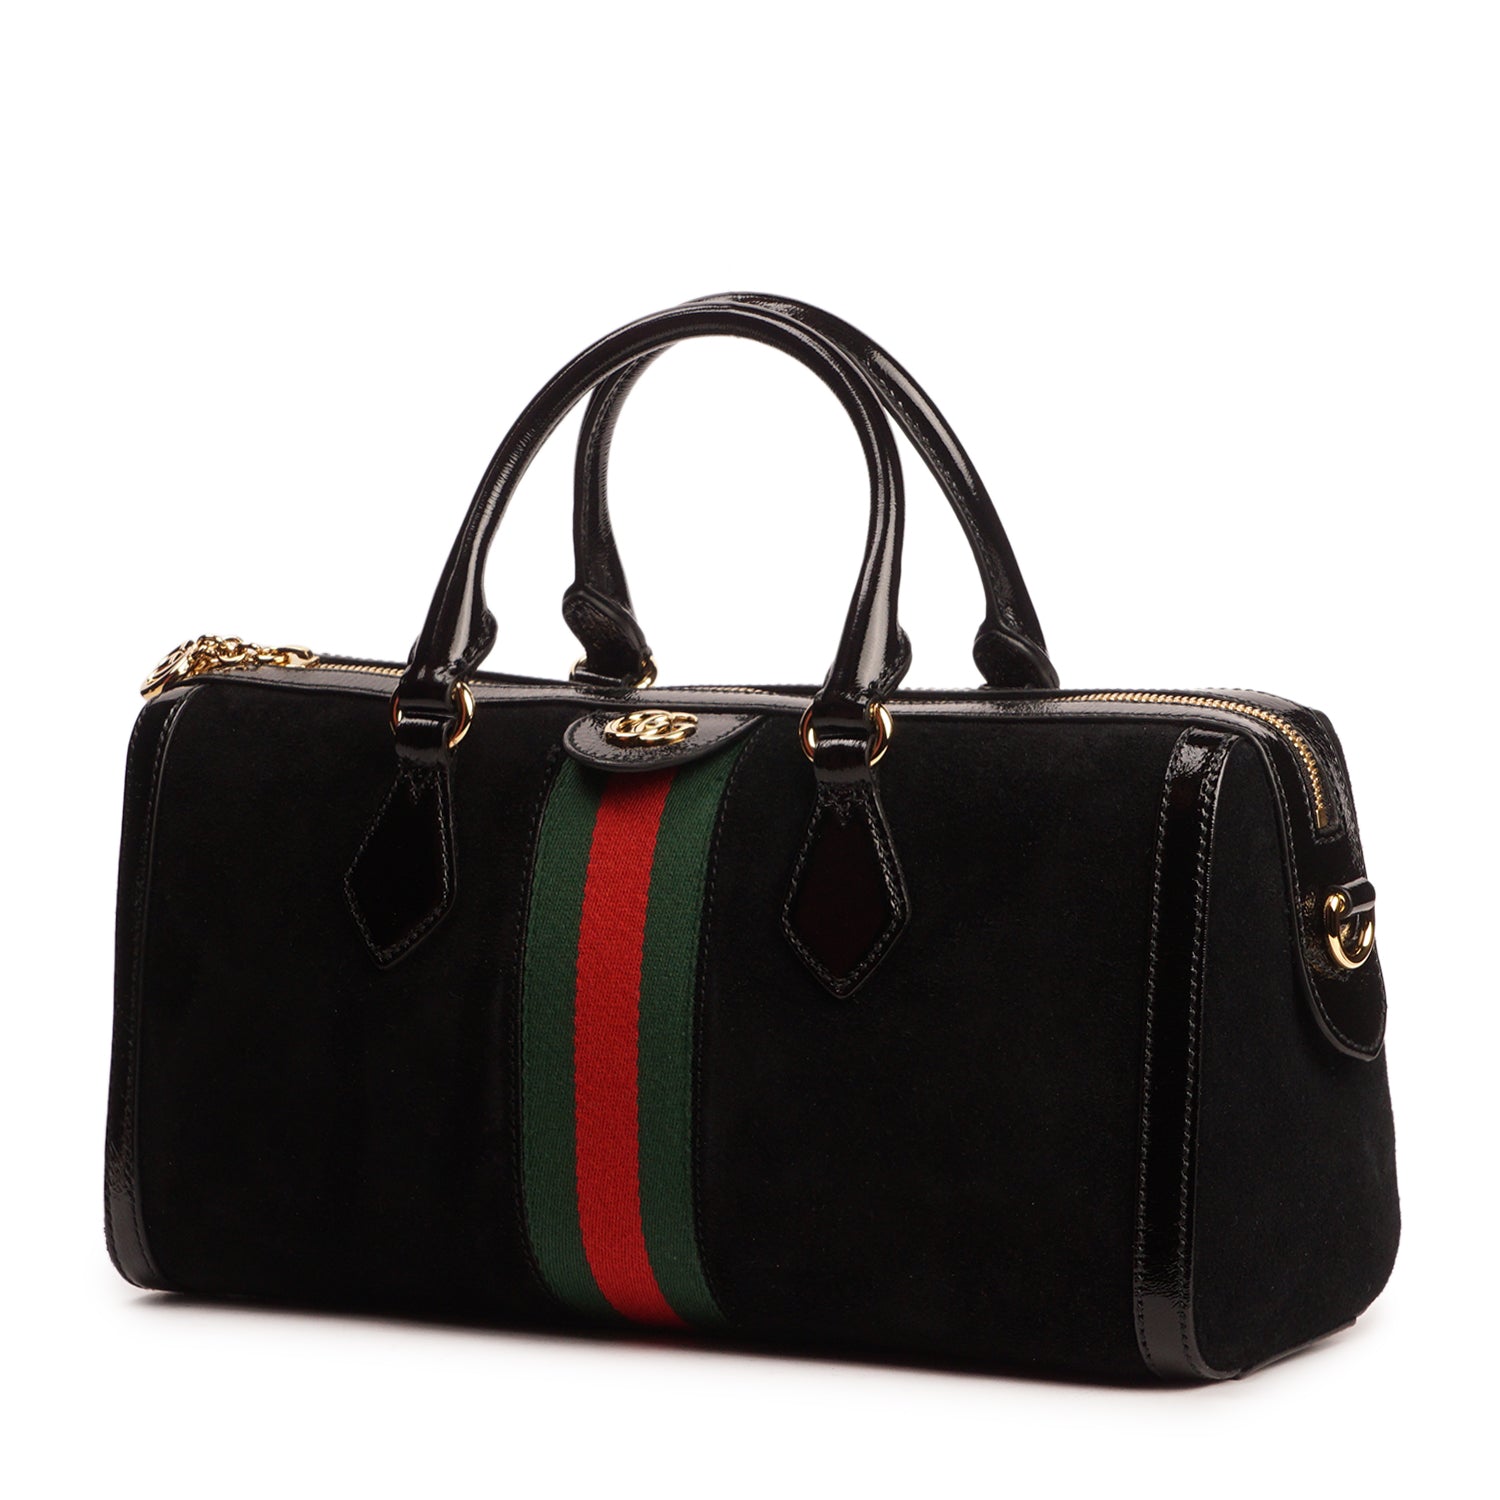 GUCCI OPHIDIA TOP HANDLE BAG IN BLACK